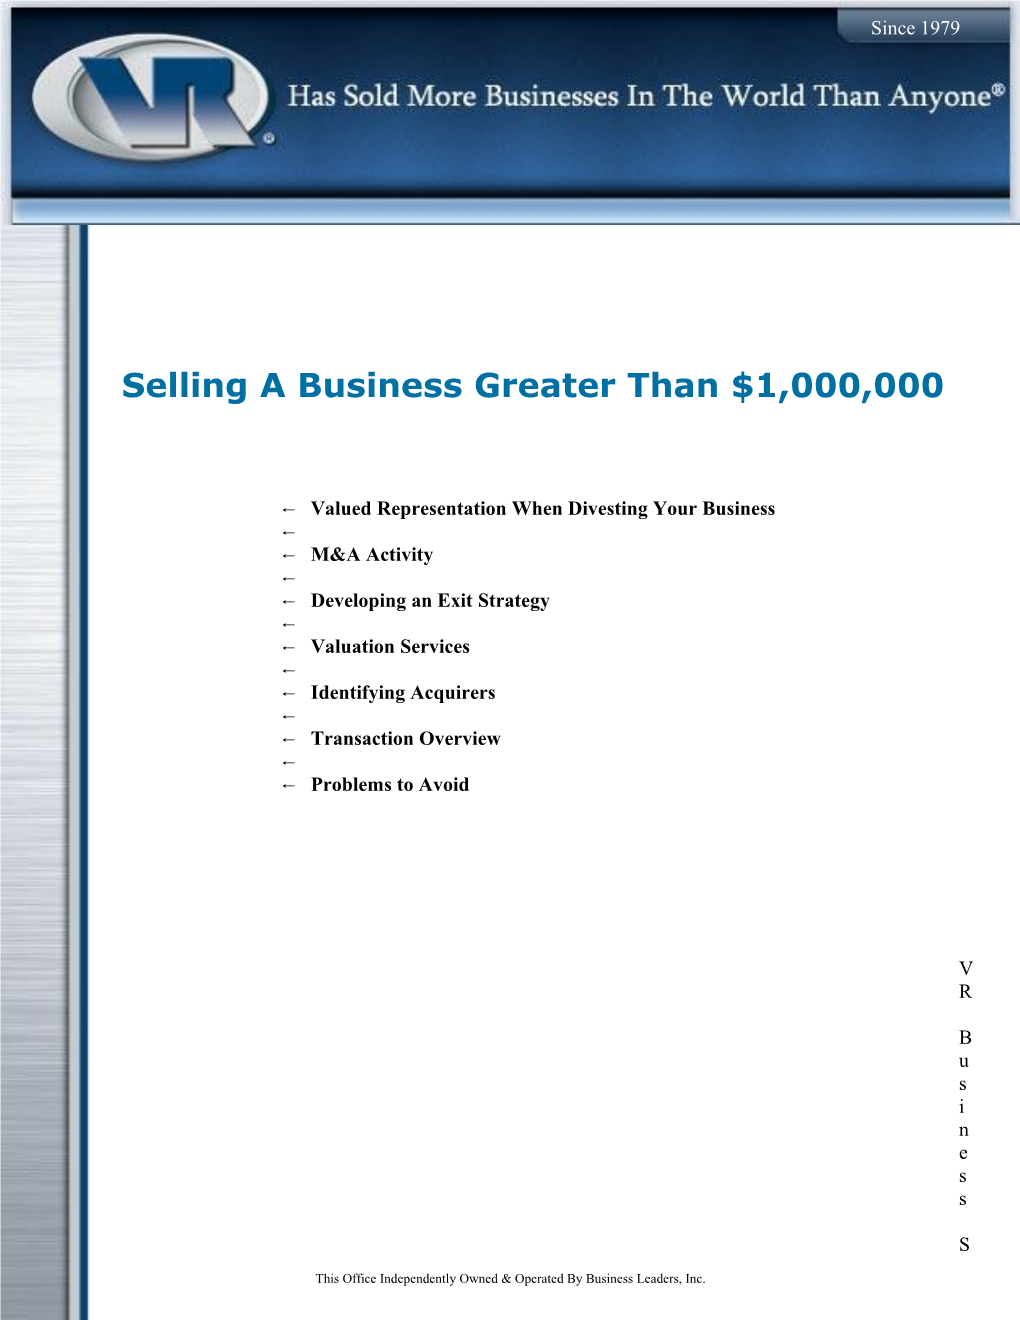 Selling a Business Greater Than $1,000,000